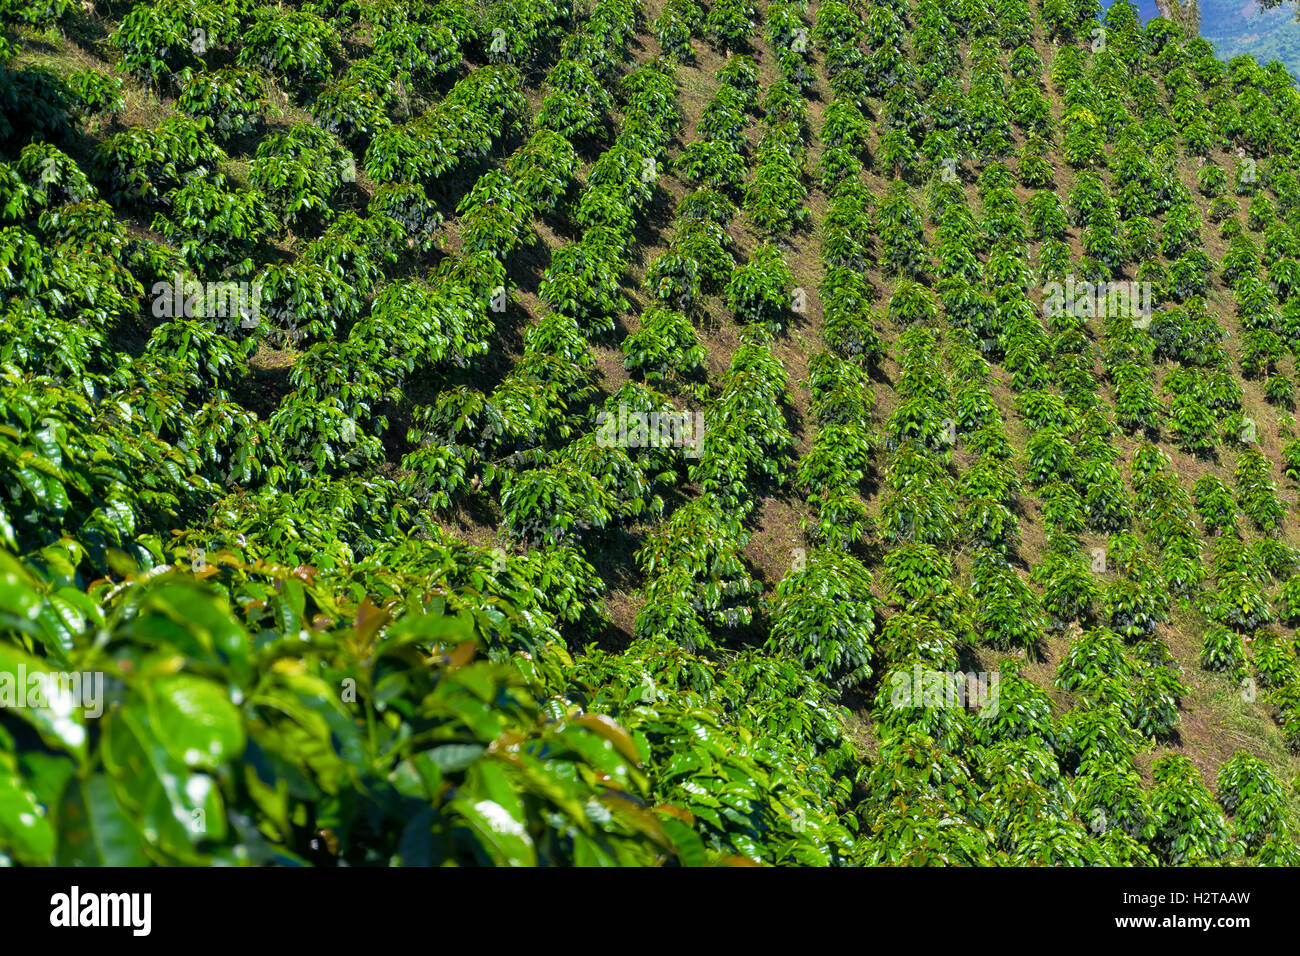 Rows of coffee plants growing outside of Manizales, Colombia Stock Photo